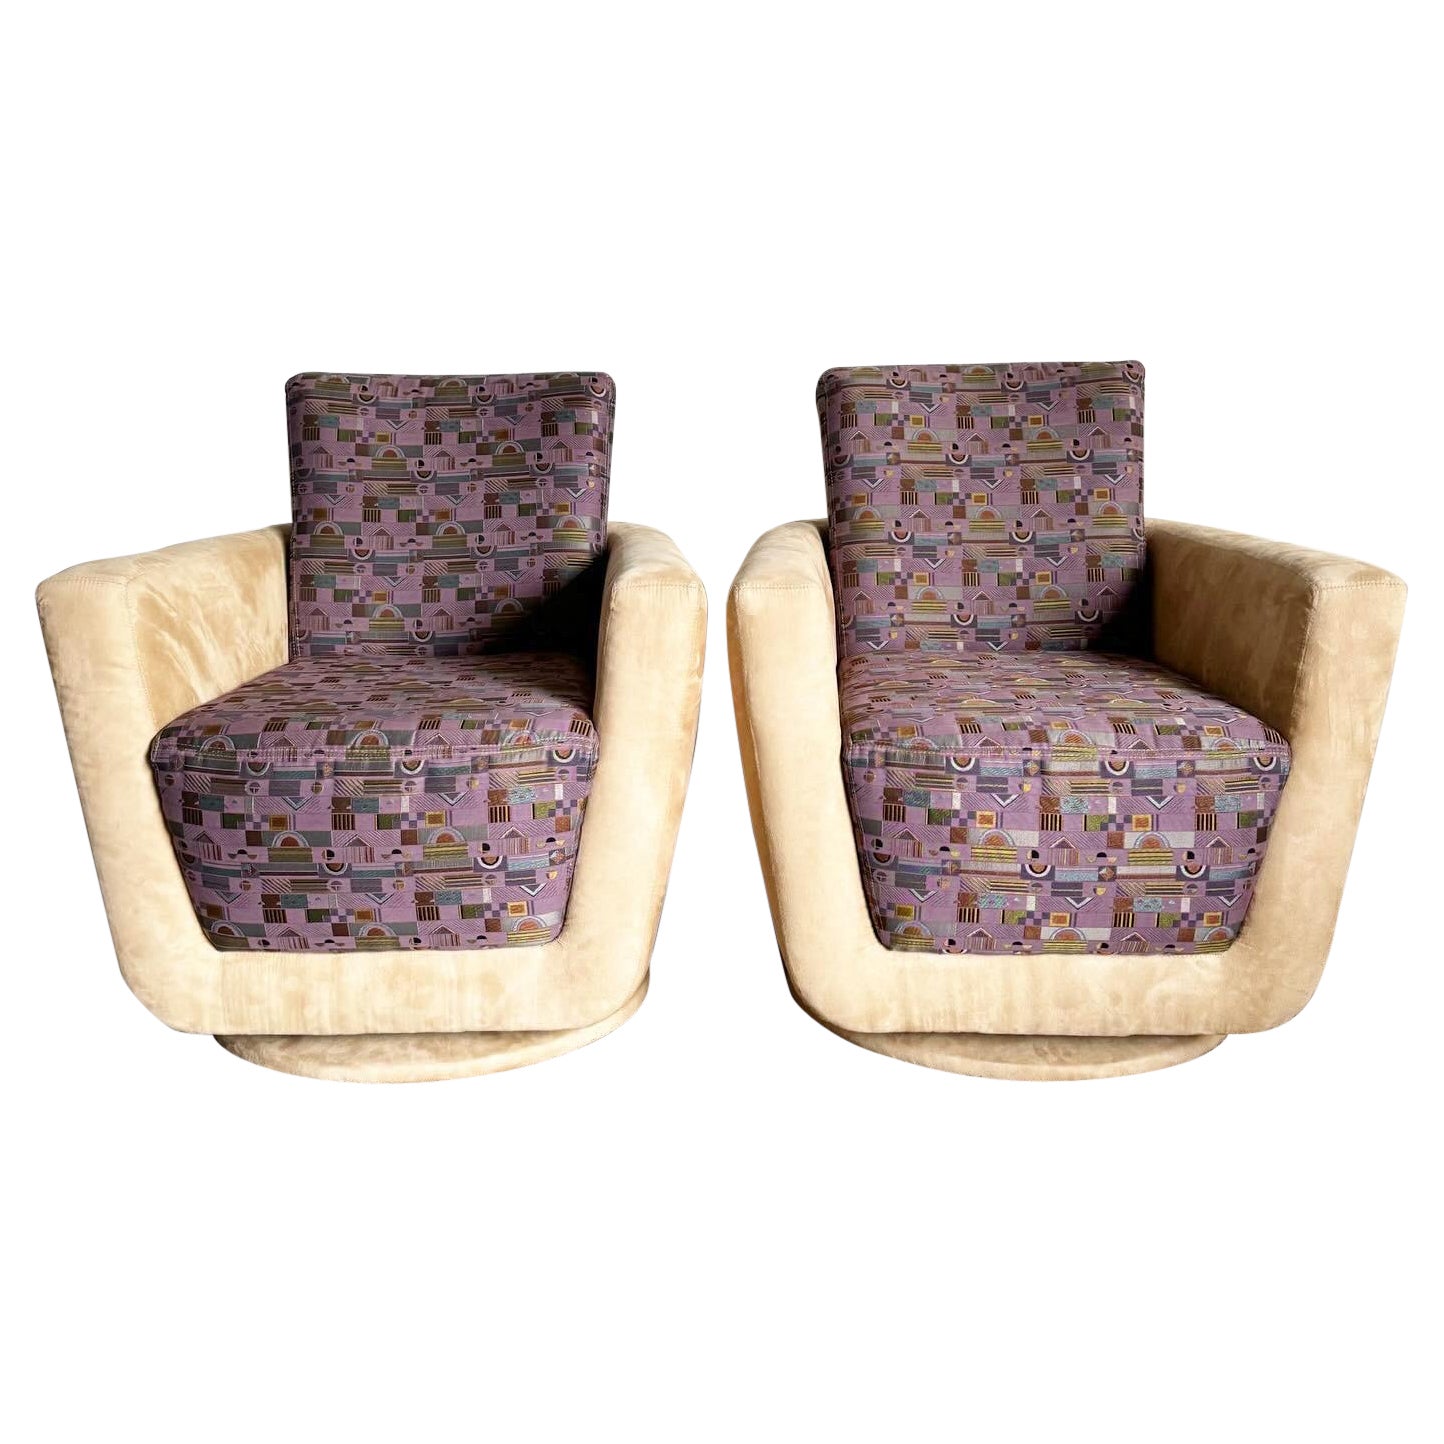 Postmodern Tan Micro Fiber and Purple Patterned Swivel Lounge Chairs - a Pair For Sale